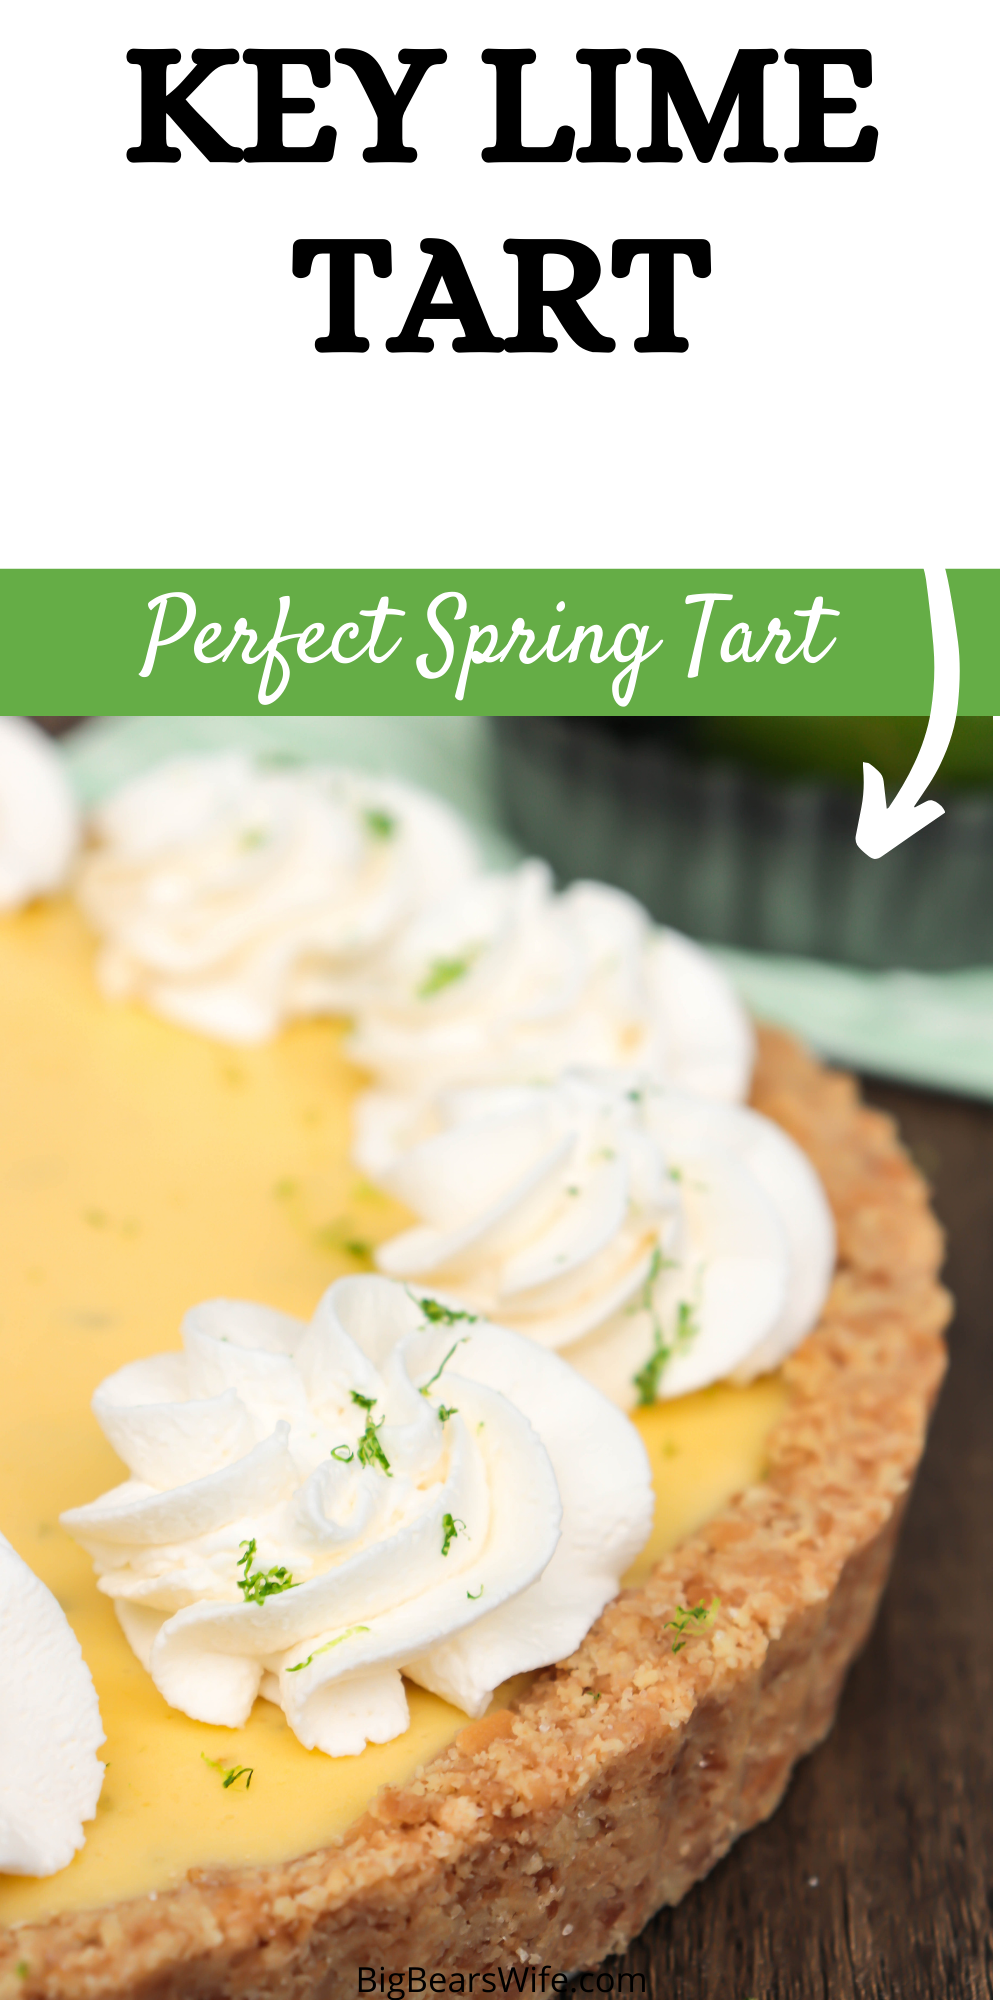  This easy Key Lime Tart has a sweet vanilla wafer crust, a tart key lime filling and it's topped with swirls of whipped cream and sprinkled with lime zest! This dessert is light and perfect for spring! via @bigbearswife